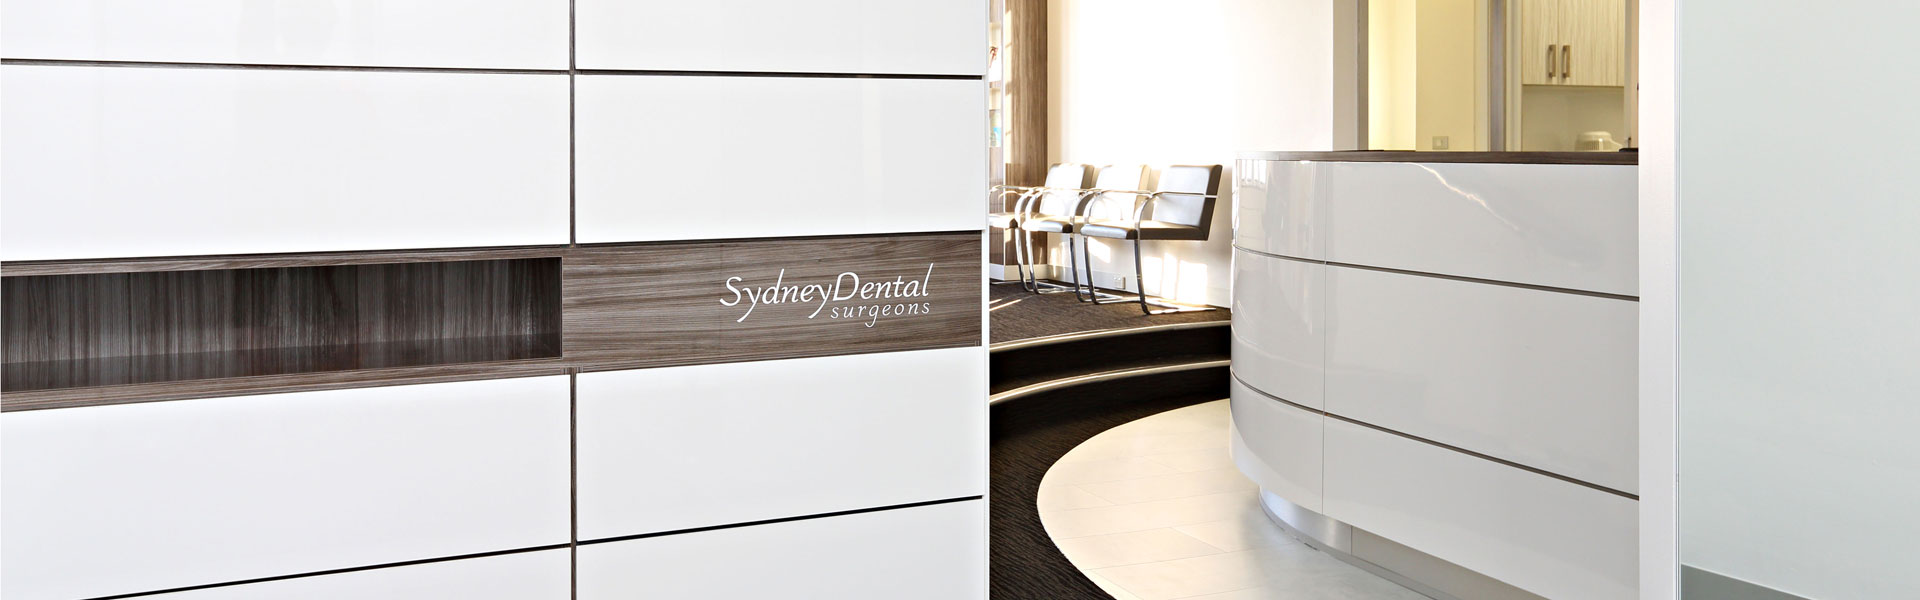 Medifit are dental practice design and fitout specialists